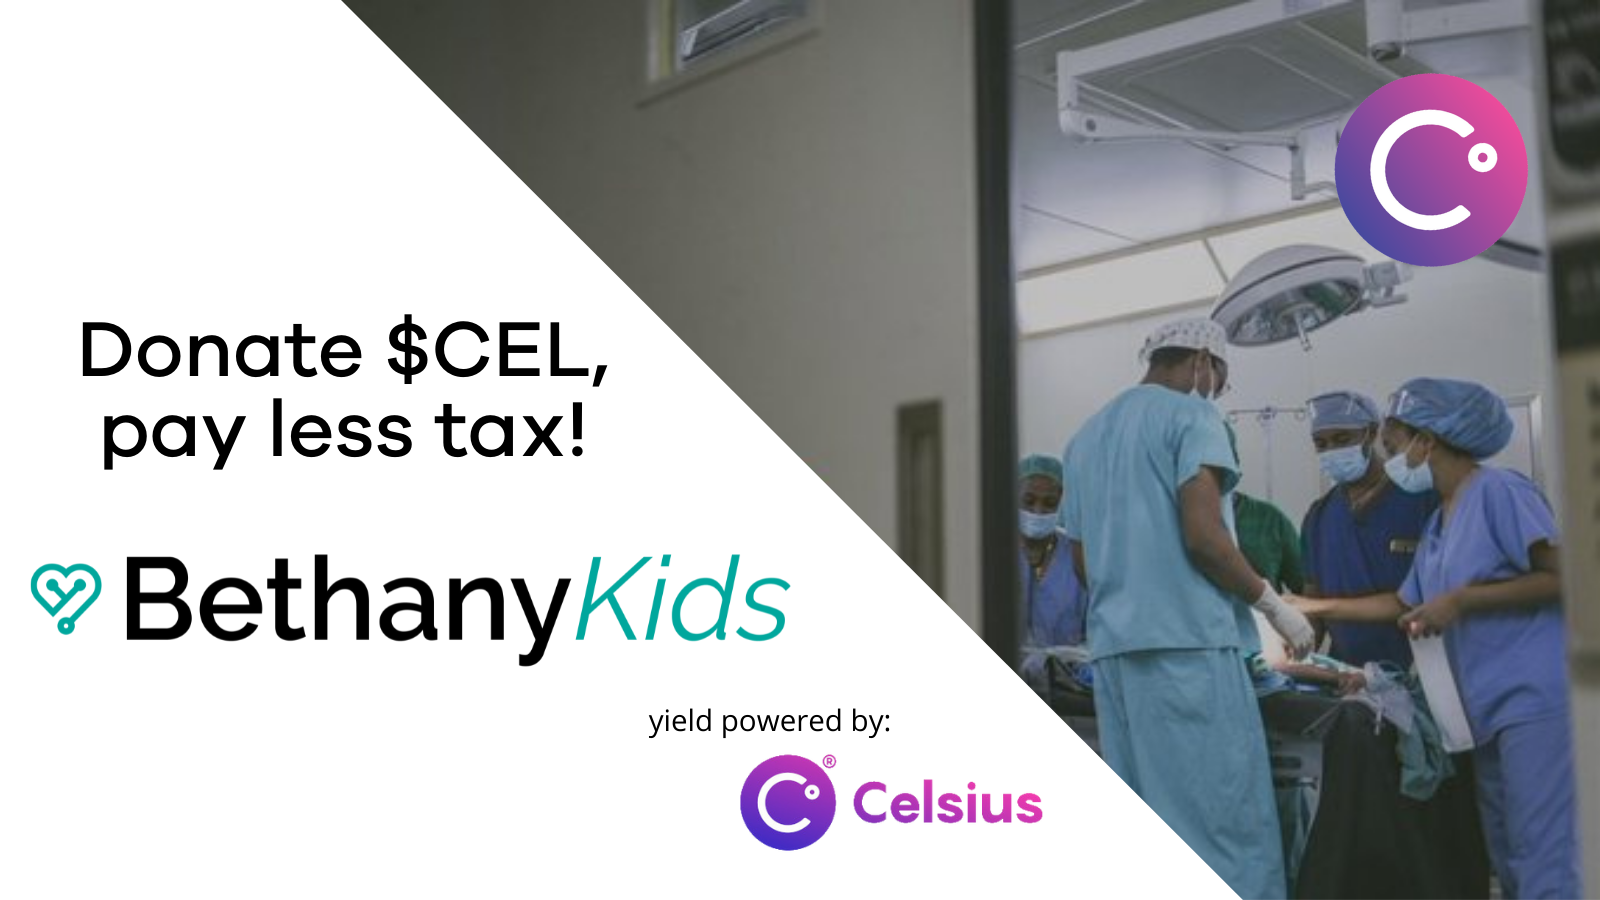 Donate $CEL, pay less tax!